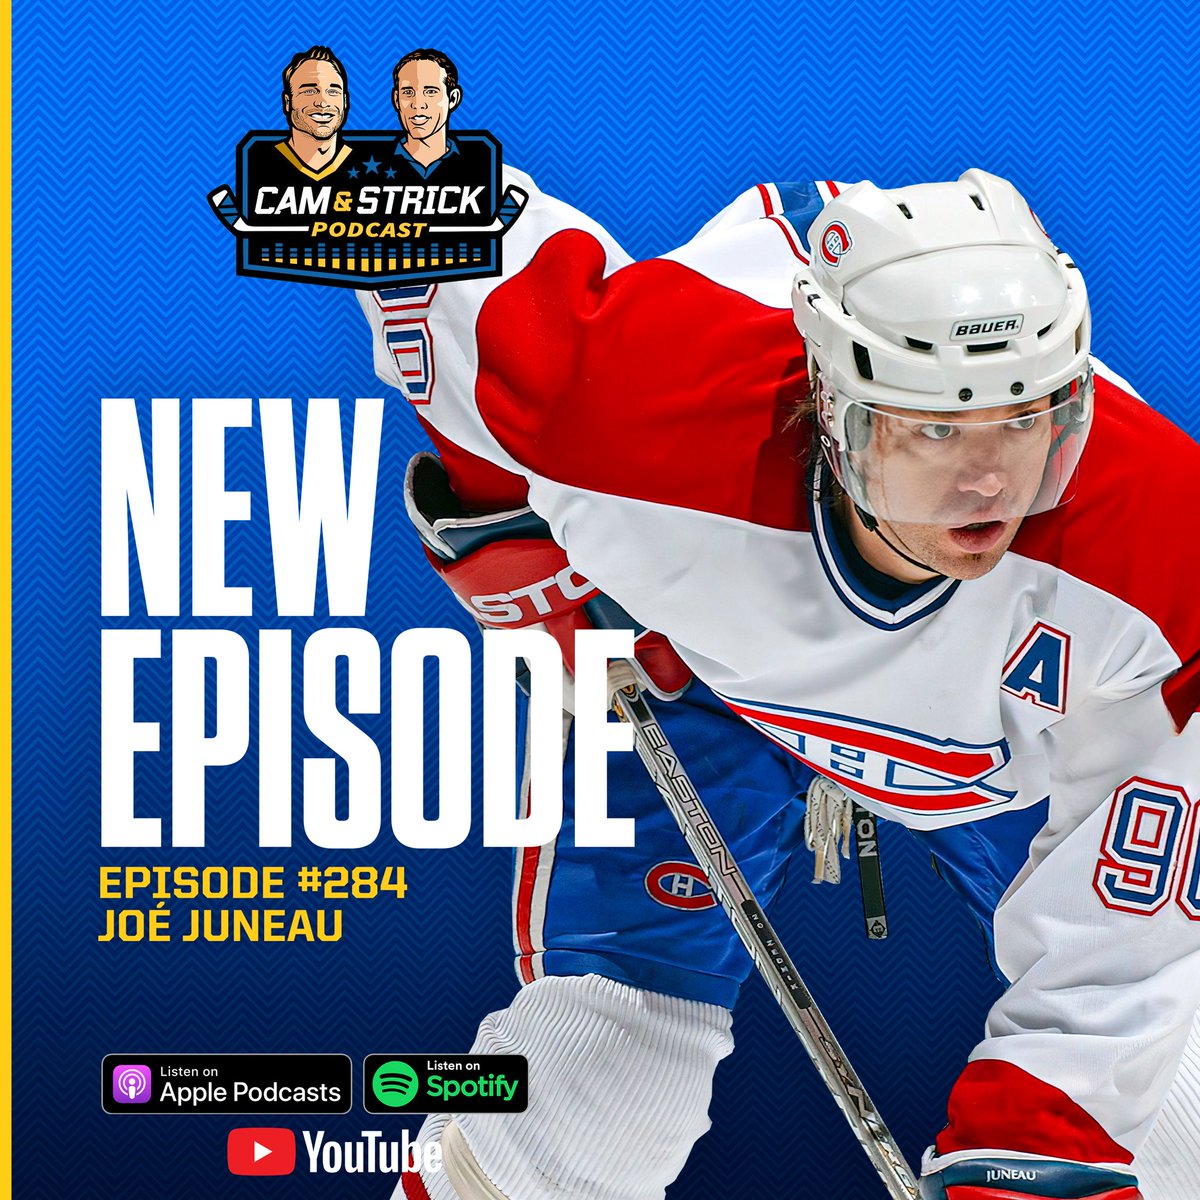 🎙️Episode #284: Joe Juneau ⁃Playing with Adam Oates ⁃Scoring on Hasek ⁃Getting traded from Boston ⁃Hyman controversy ⁃60 goals vs 100 assists ➕ Much more 🎧:camandstrick.com/subscribe 📺: youtu.be/cib-NZ4lnVc?fe…